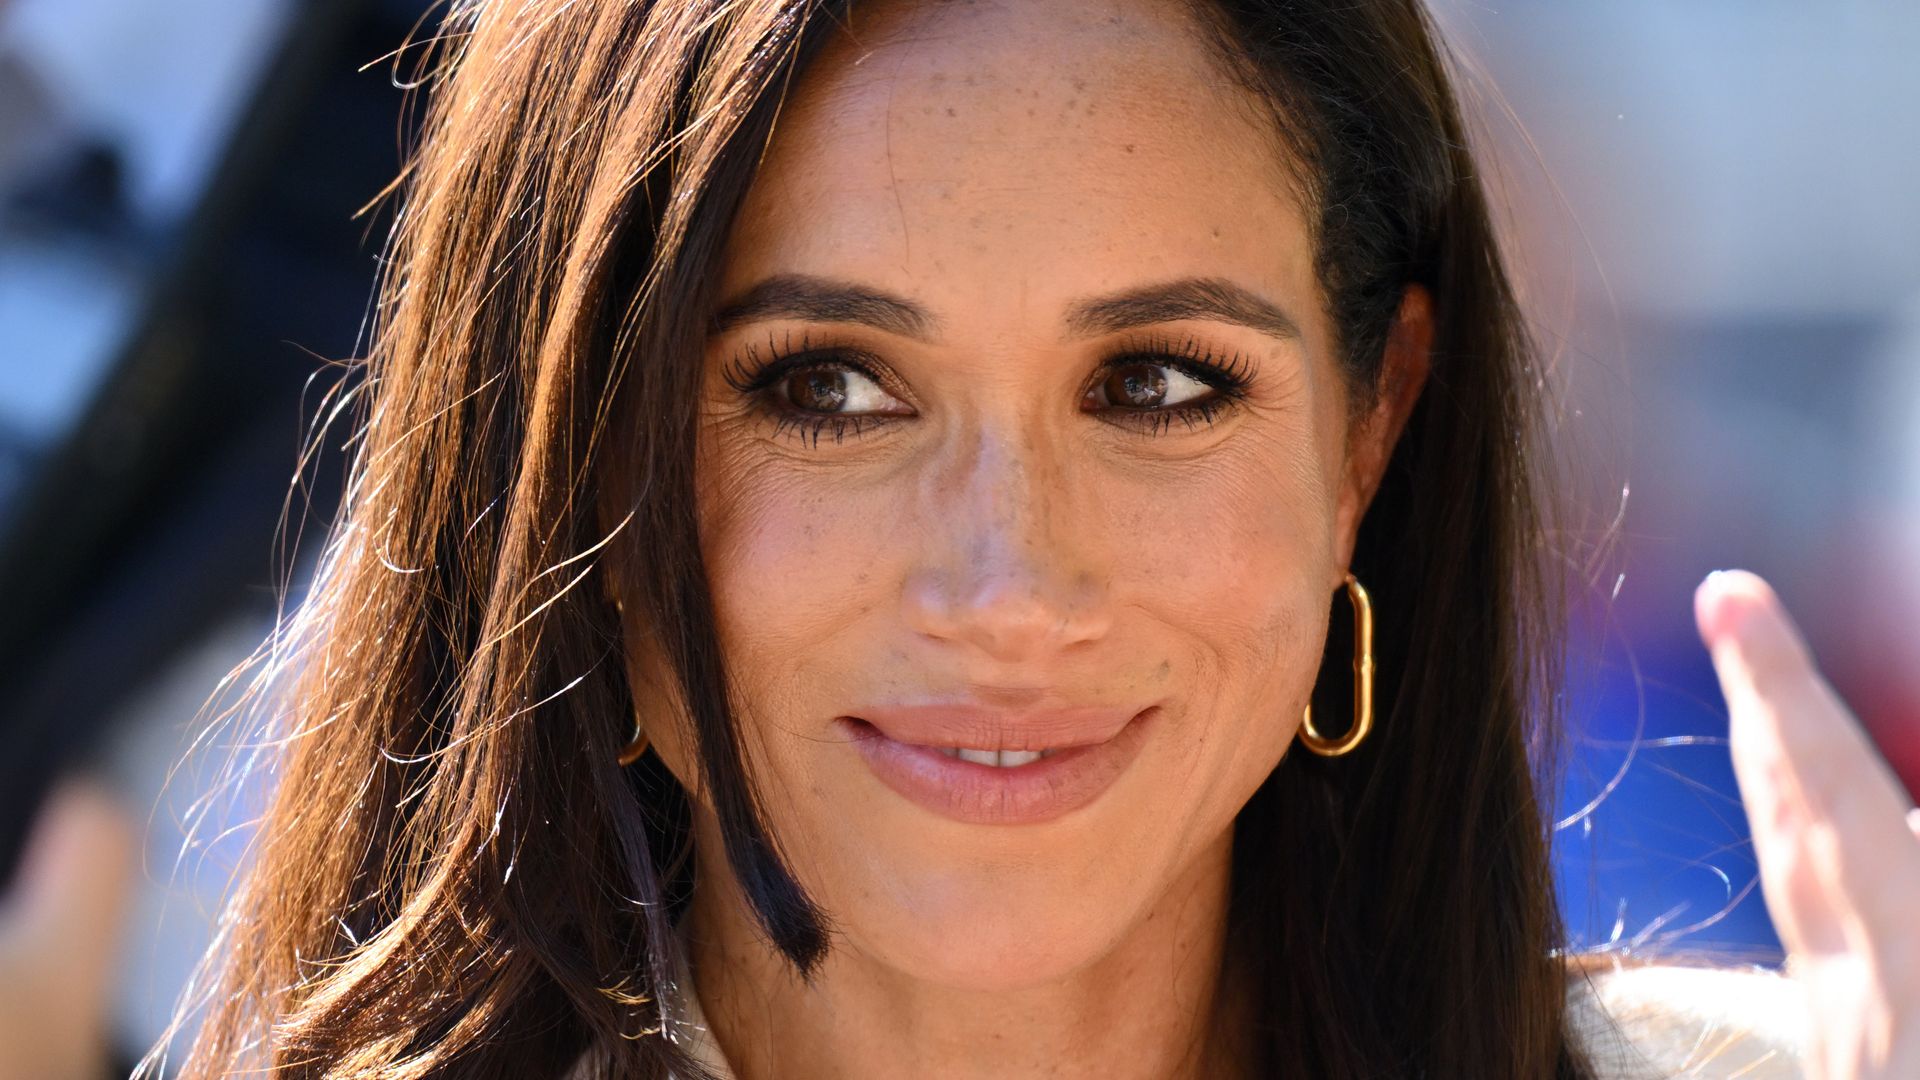 Meghan Markle just wore a pair of Hermès sandals in a colour we've not seen before